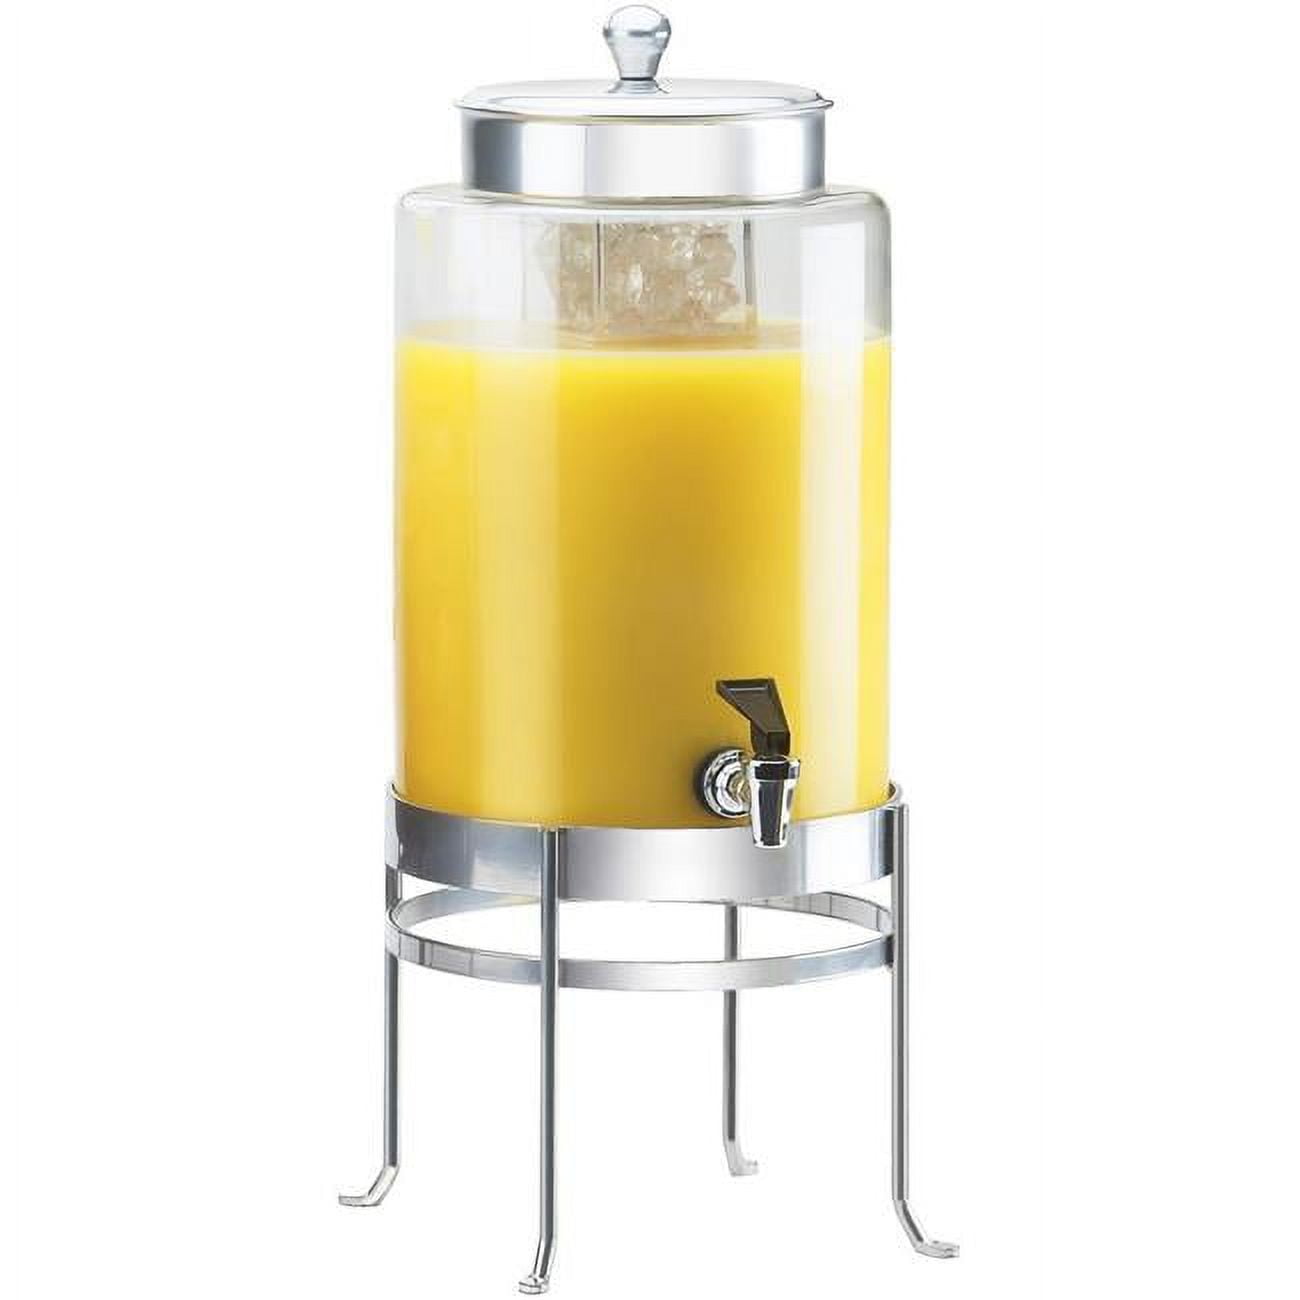 Picture of Cal Mil 1580-2-74 2 gal Silver Soho Glass Beverage Dispenser with Ice Chamber - 10 x 12 x 20.5 in.